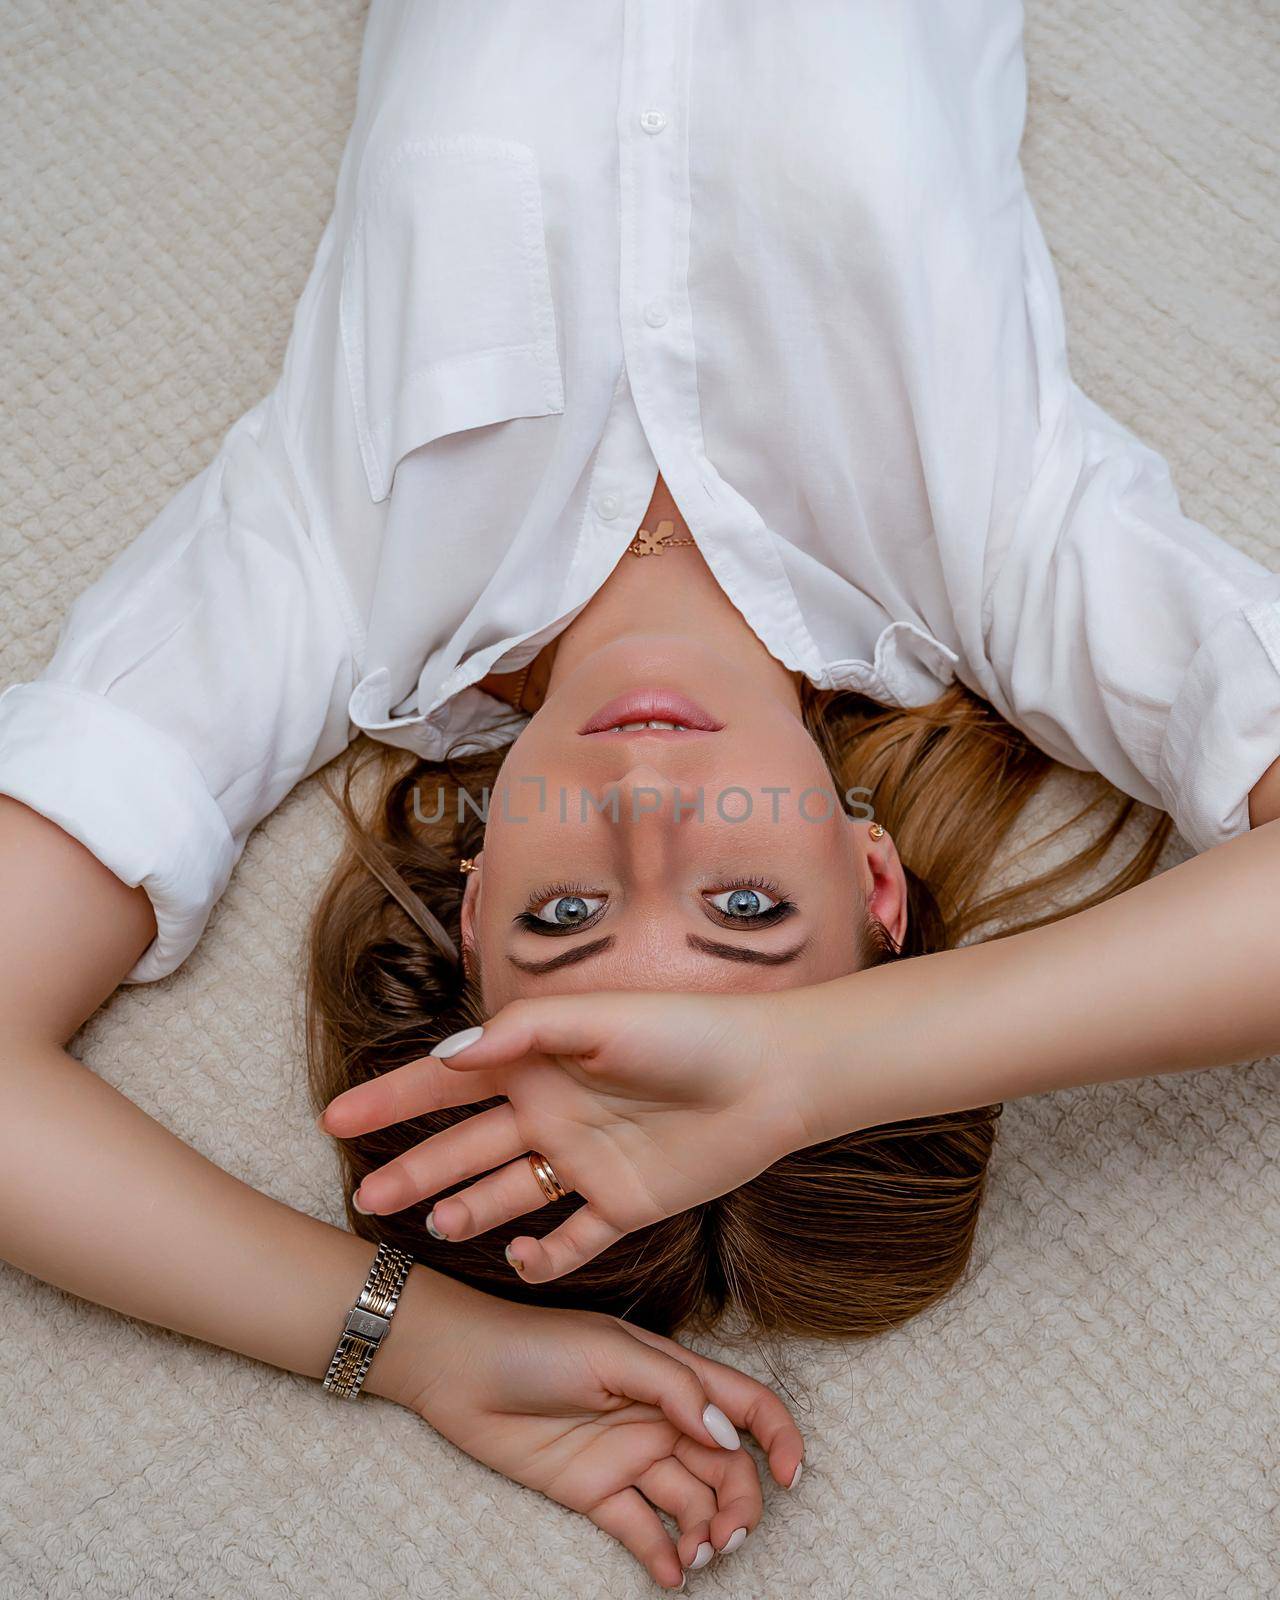 The woman lies on the bed on her back, top view. She looks straight ahead, wearing a white shirt by Matiunina